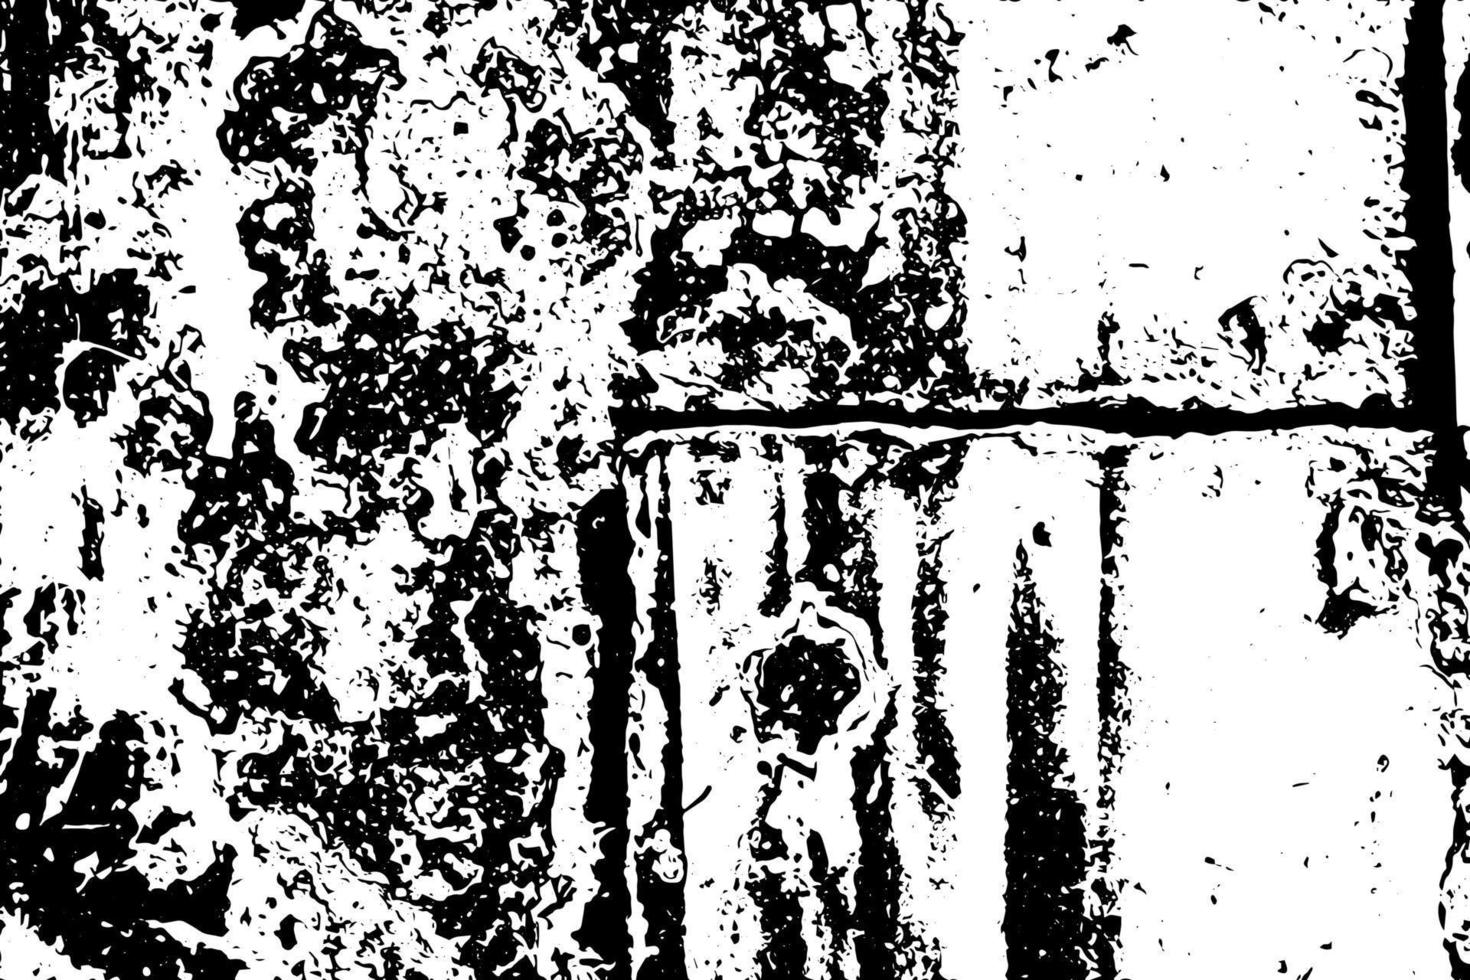 Rustic grunge vector texture with grain and stains. Abstract noise background. Weathered surface. Dirty and damaged.